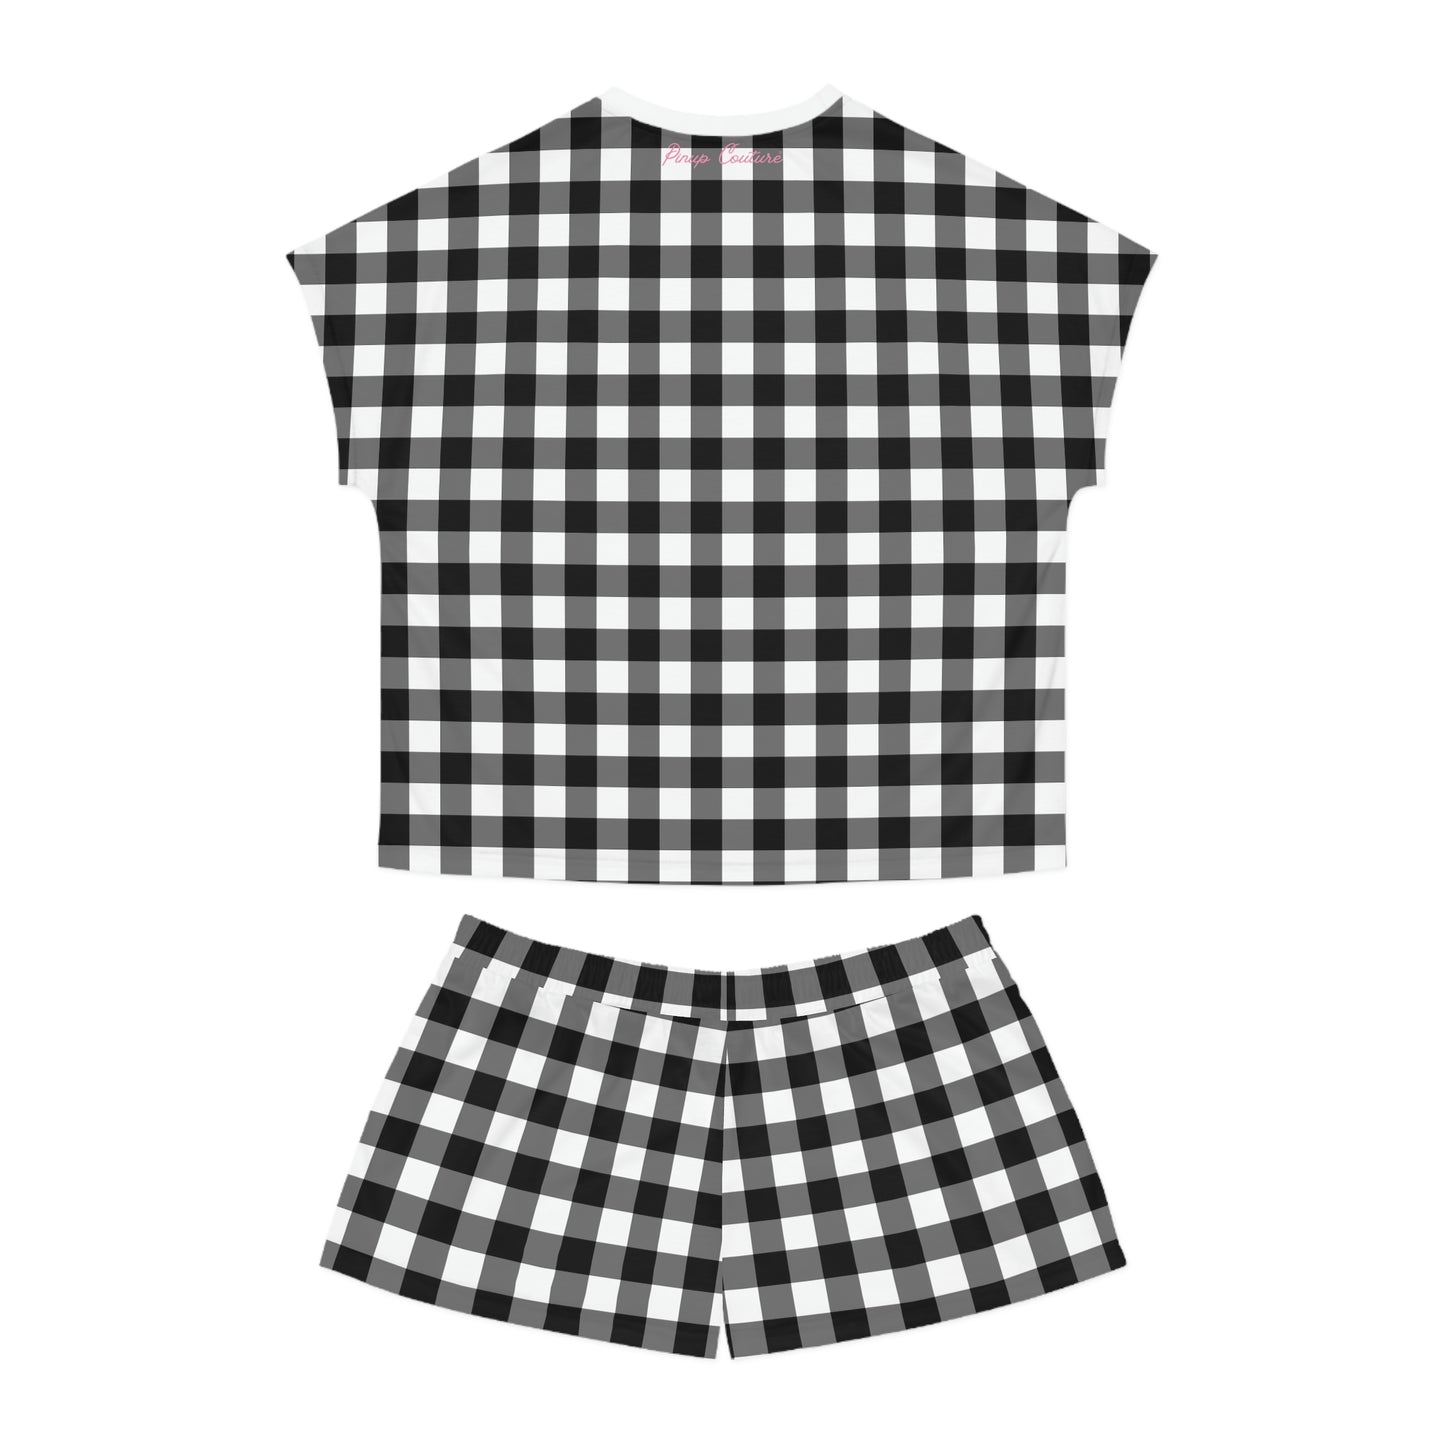 TGIF Sleepover PJs in Badass Black Gingham Tee & Pajama Shorts-Set | Pinup Couture Relaxed